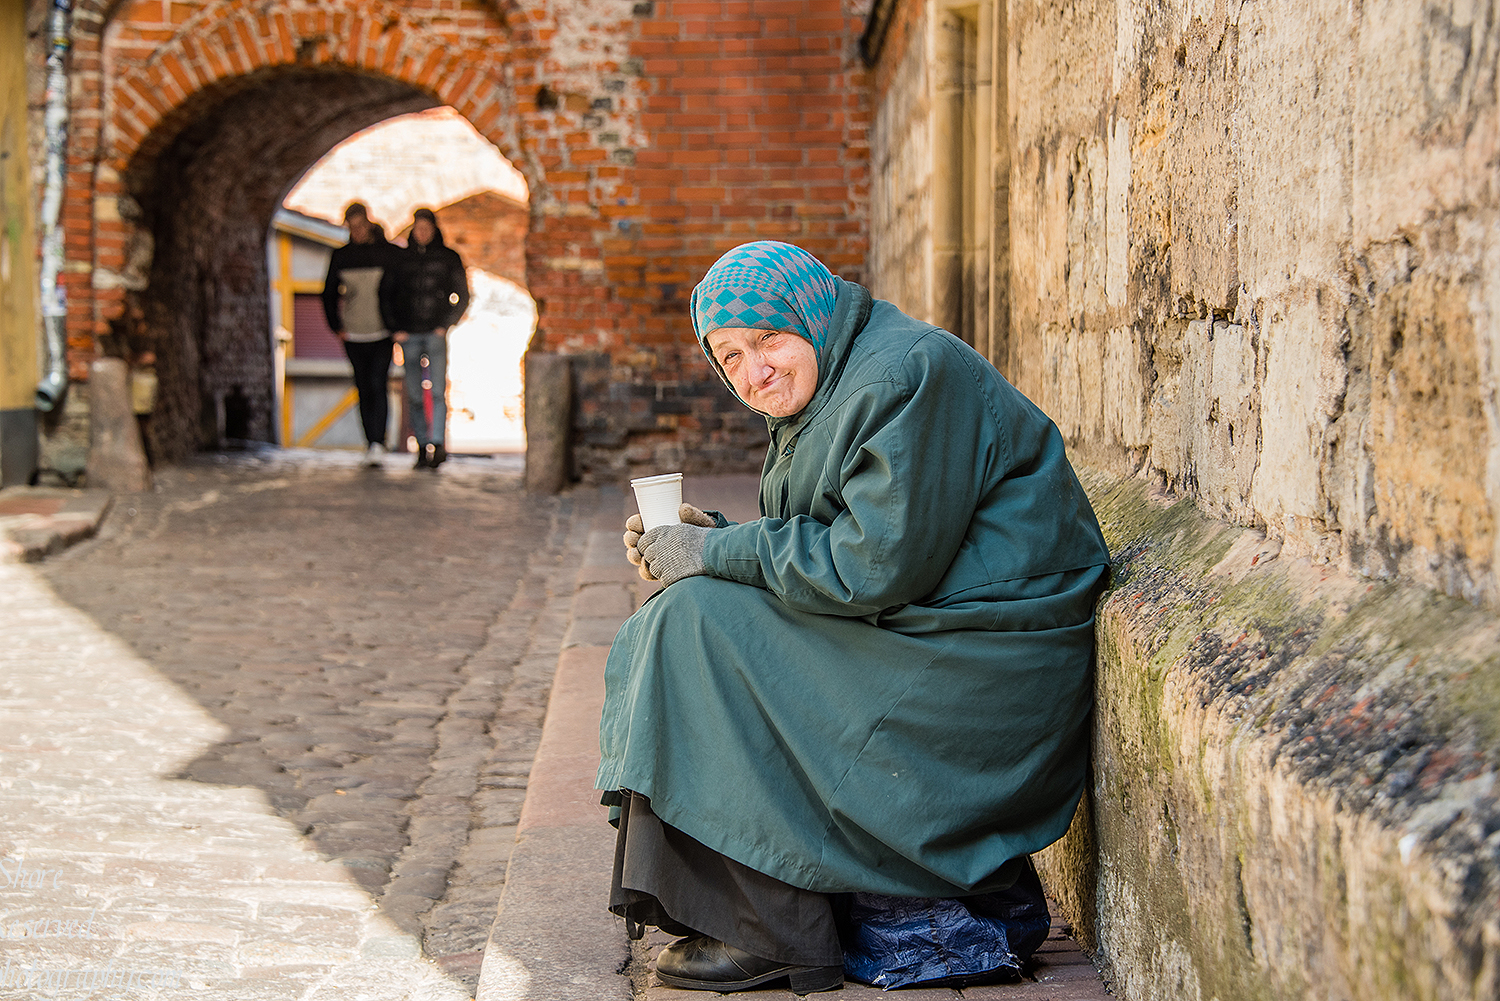 Smiling old woman in Riga Latvia old town. Nikkor 200mm